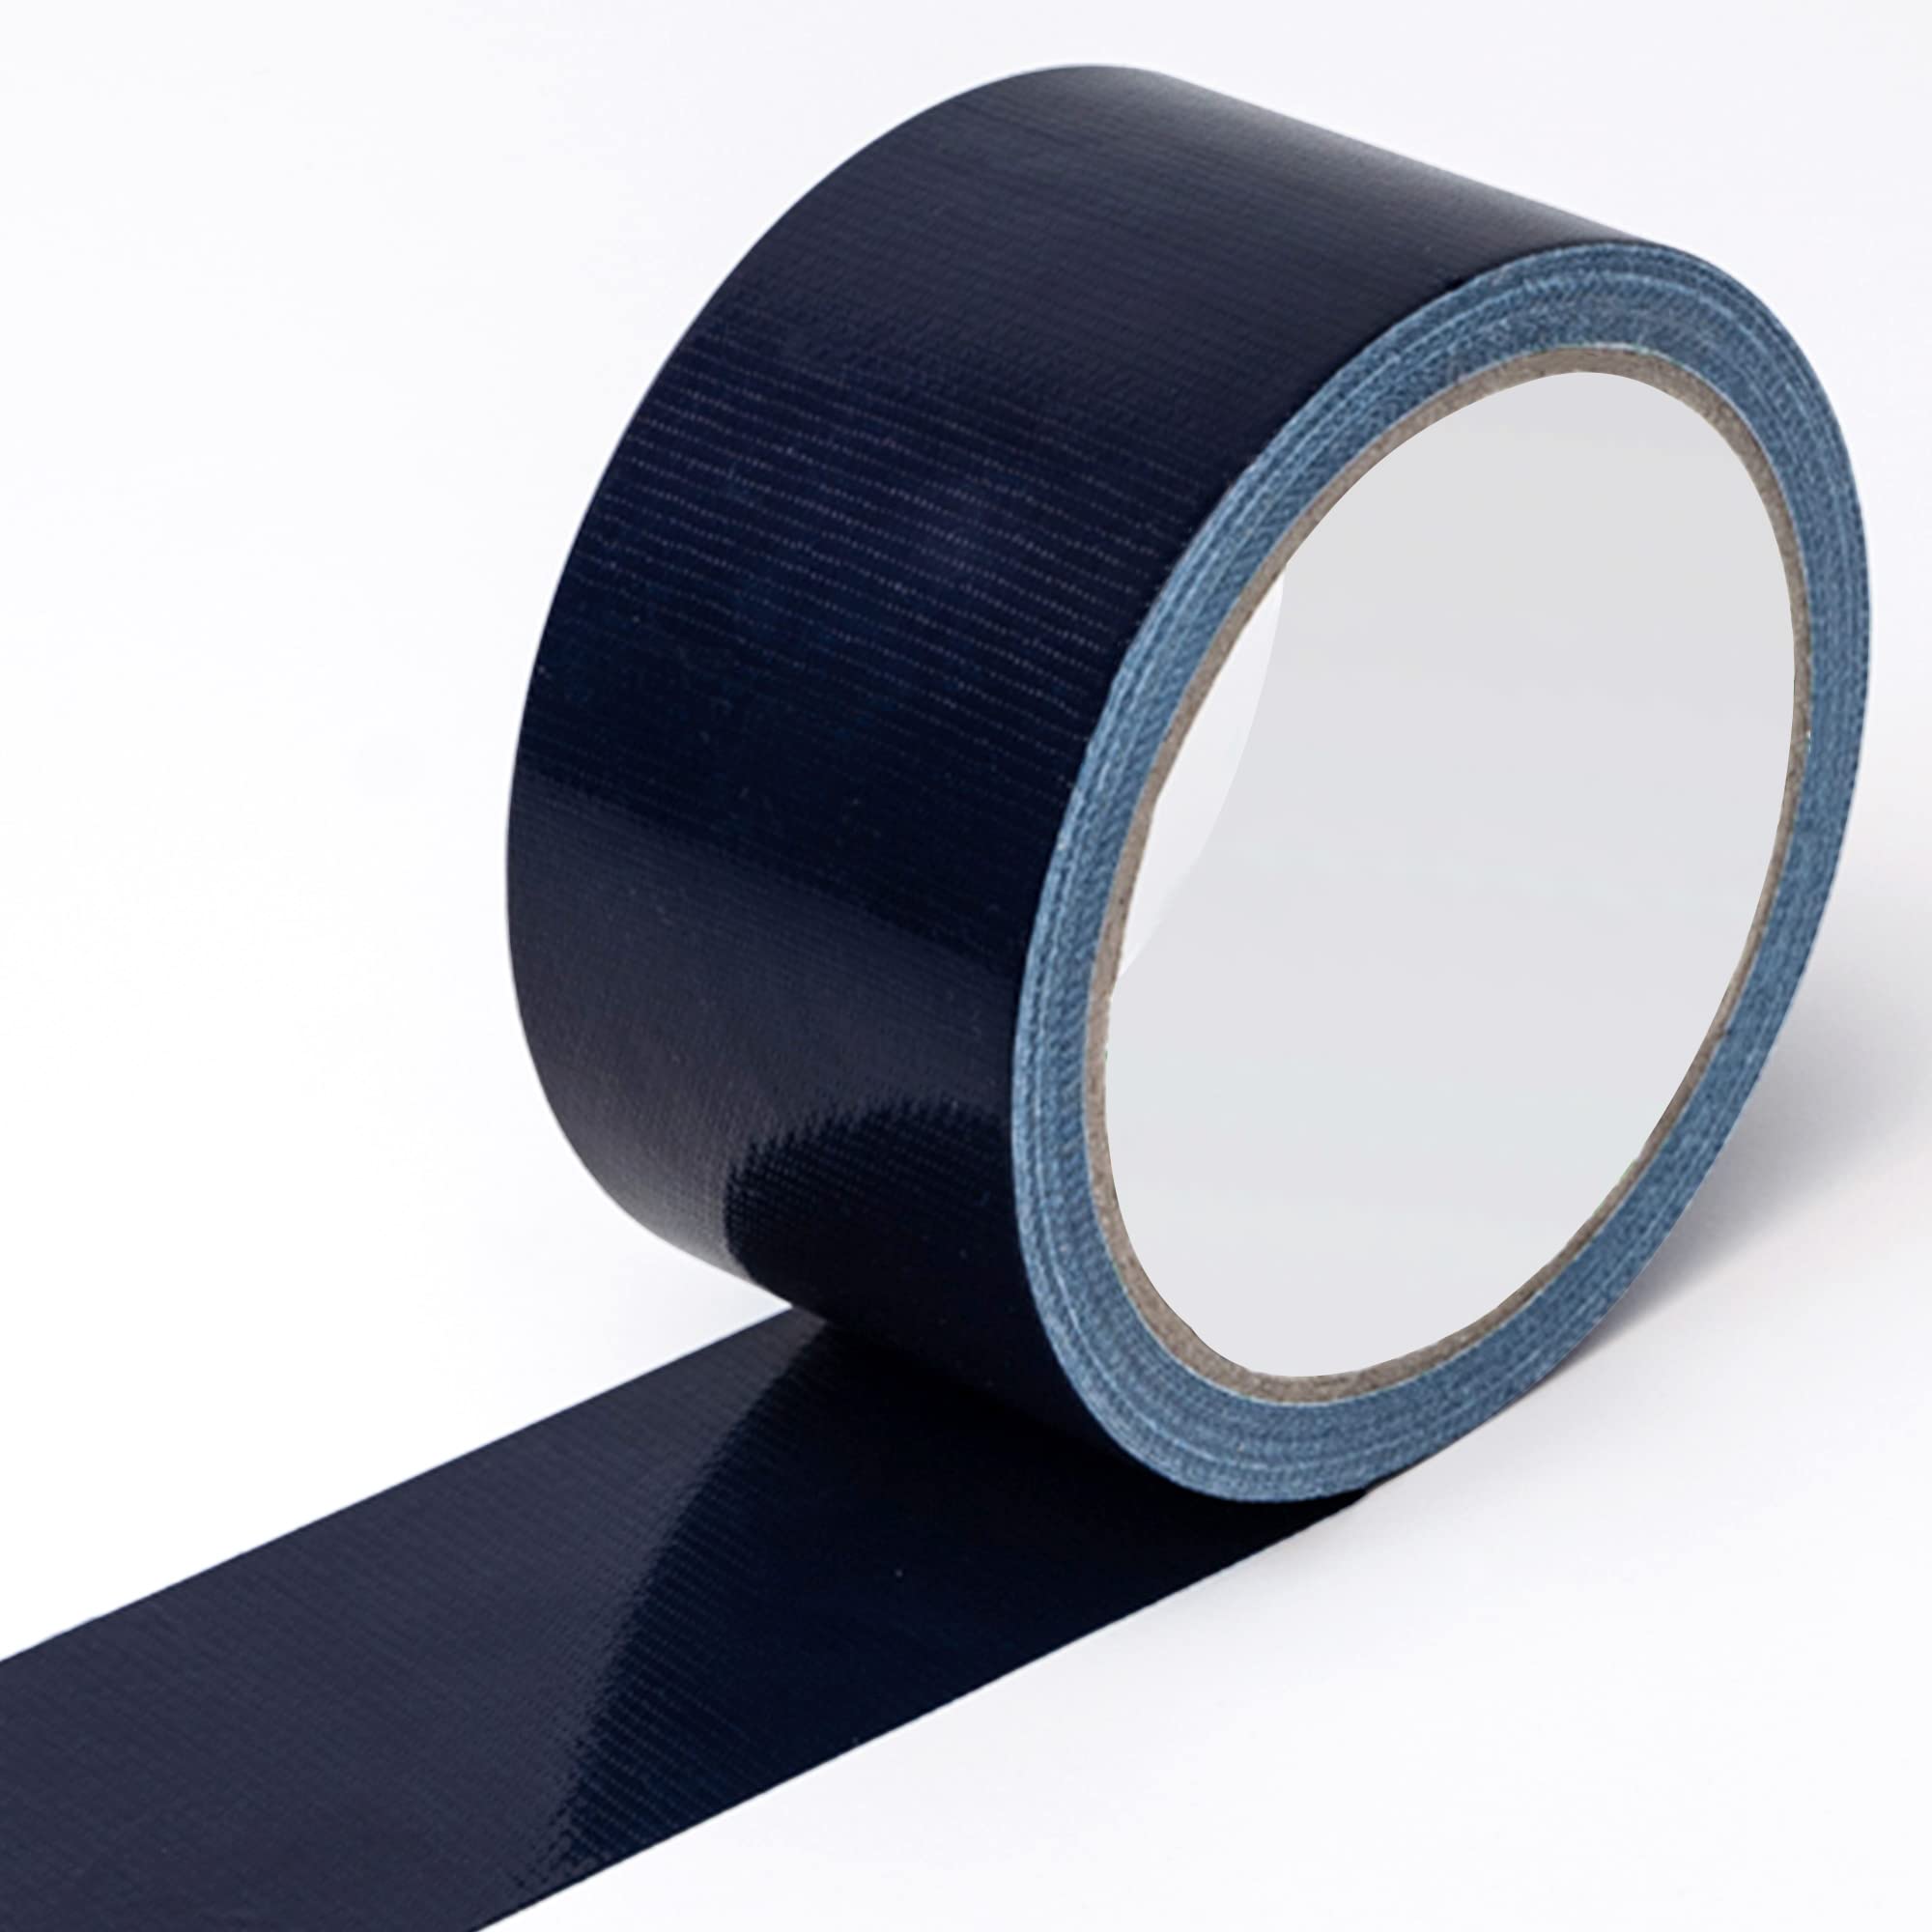 Reniteco Navy Blue Duct Tape- 2 inches x 10 Yards Heavy Duty Duct Tape  Waterproof Resistant NO-Residue UV Blocking Pack of 1 2 10yard Navy Blue